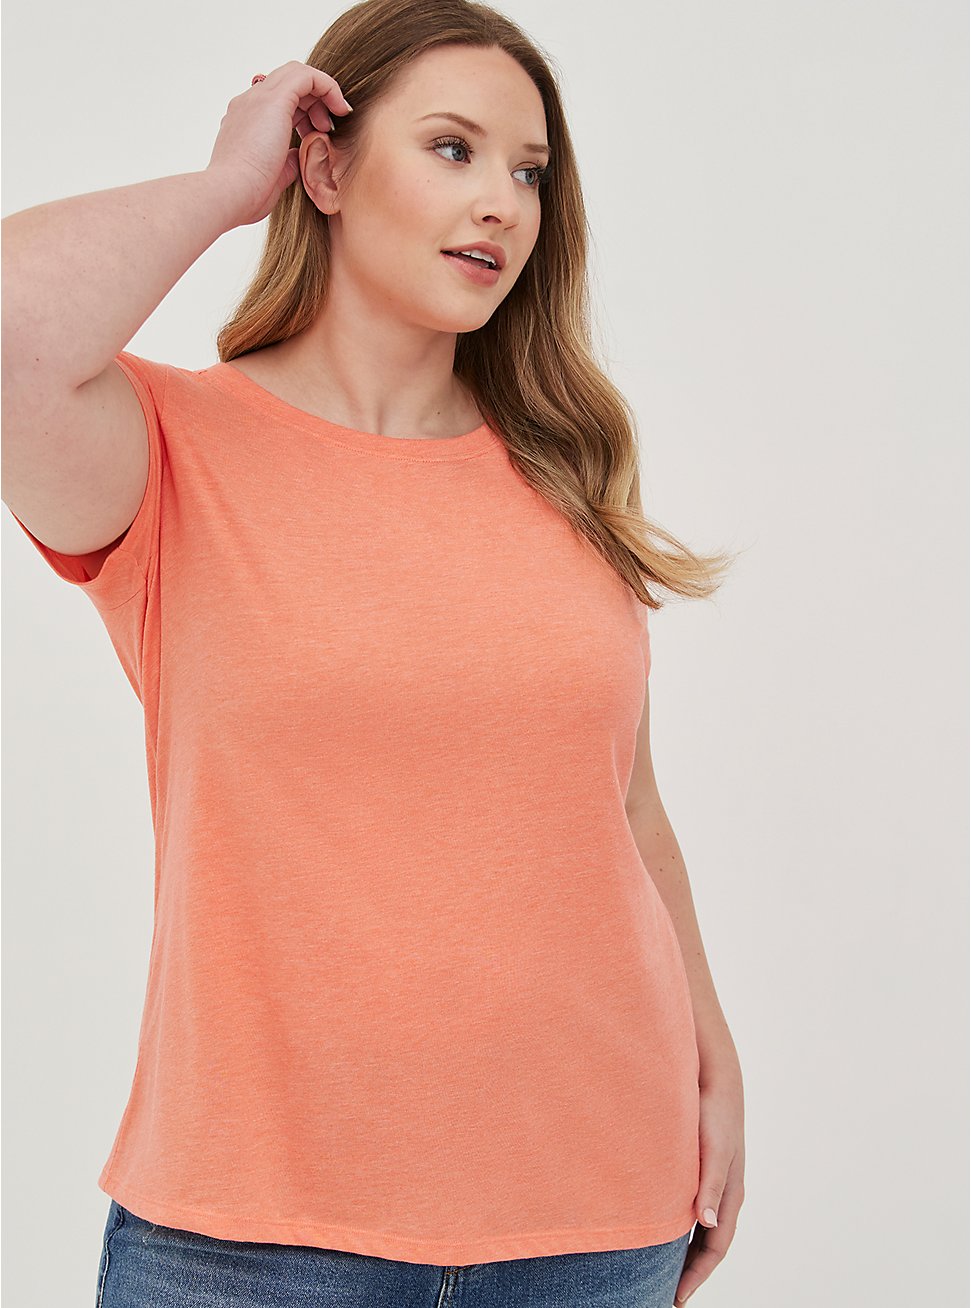 Everyday Tee - Signature Jersey Coral, LIVING CORAL, hi-res